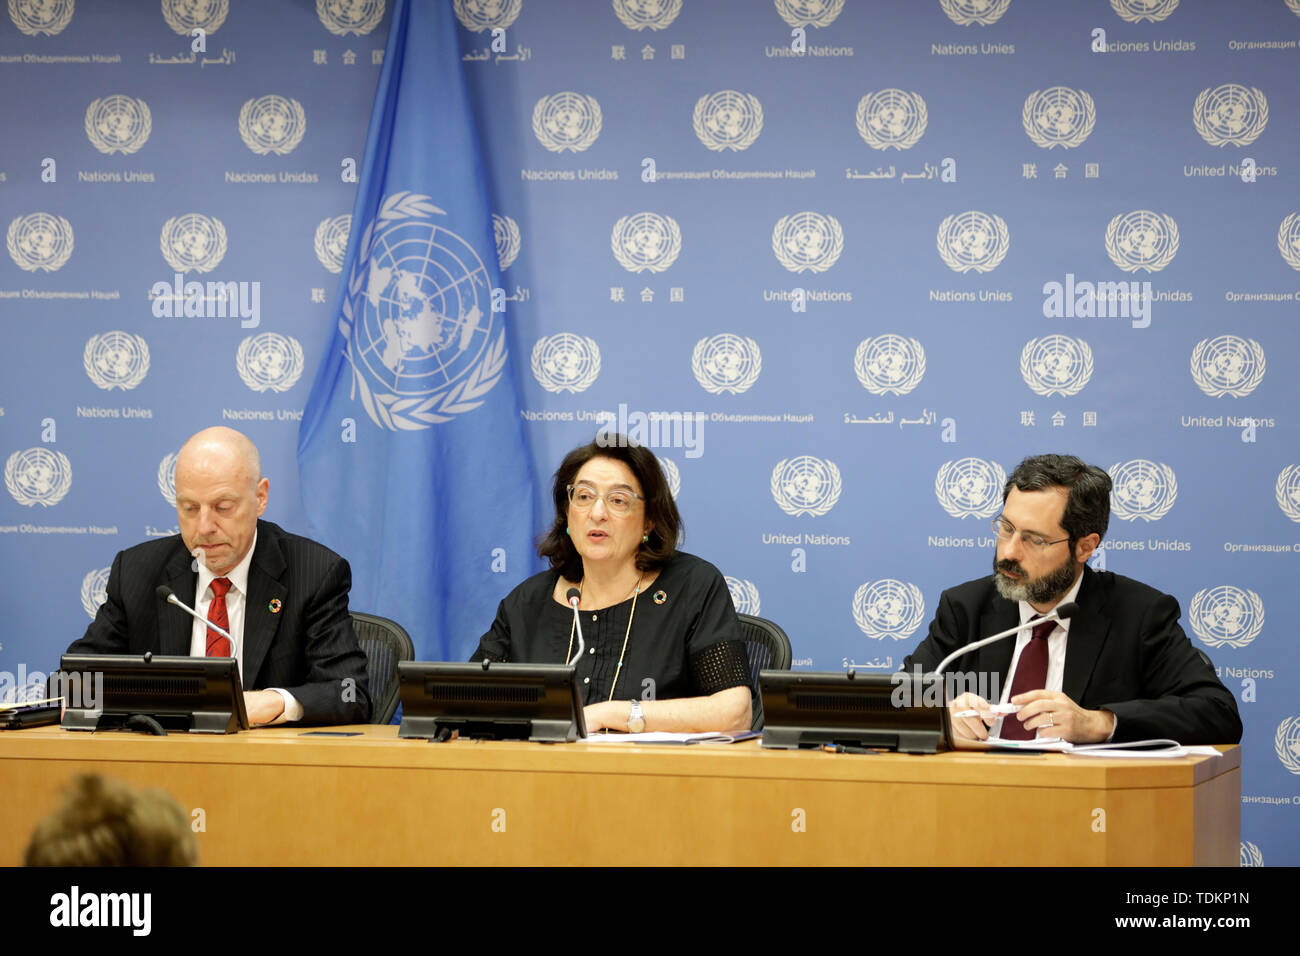 (190617) -- UNITED NATIONS, June 17, 2019 (Xinhua) -- John Wilmoth, Director of the Population Division of the UN Department of Economic and Social Affairs (UNDESA), Maria-Francesca Spatolisano, Assistant Secretary-General for Policy Coordination and Inter-Agency Affairs in UNDESA, and Patrick Gerland, Chief of the Population Estimates and Projections Section of the Population Division of UNDESA (from L to R), brief journalists on the World Population Prospects 2019: Highlights, at the UN headquarters in New York, June 17, 2019. The world's population is expected to increase by 2 billion in th Stock Photo